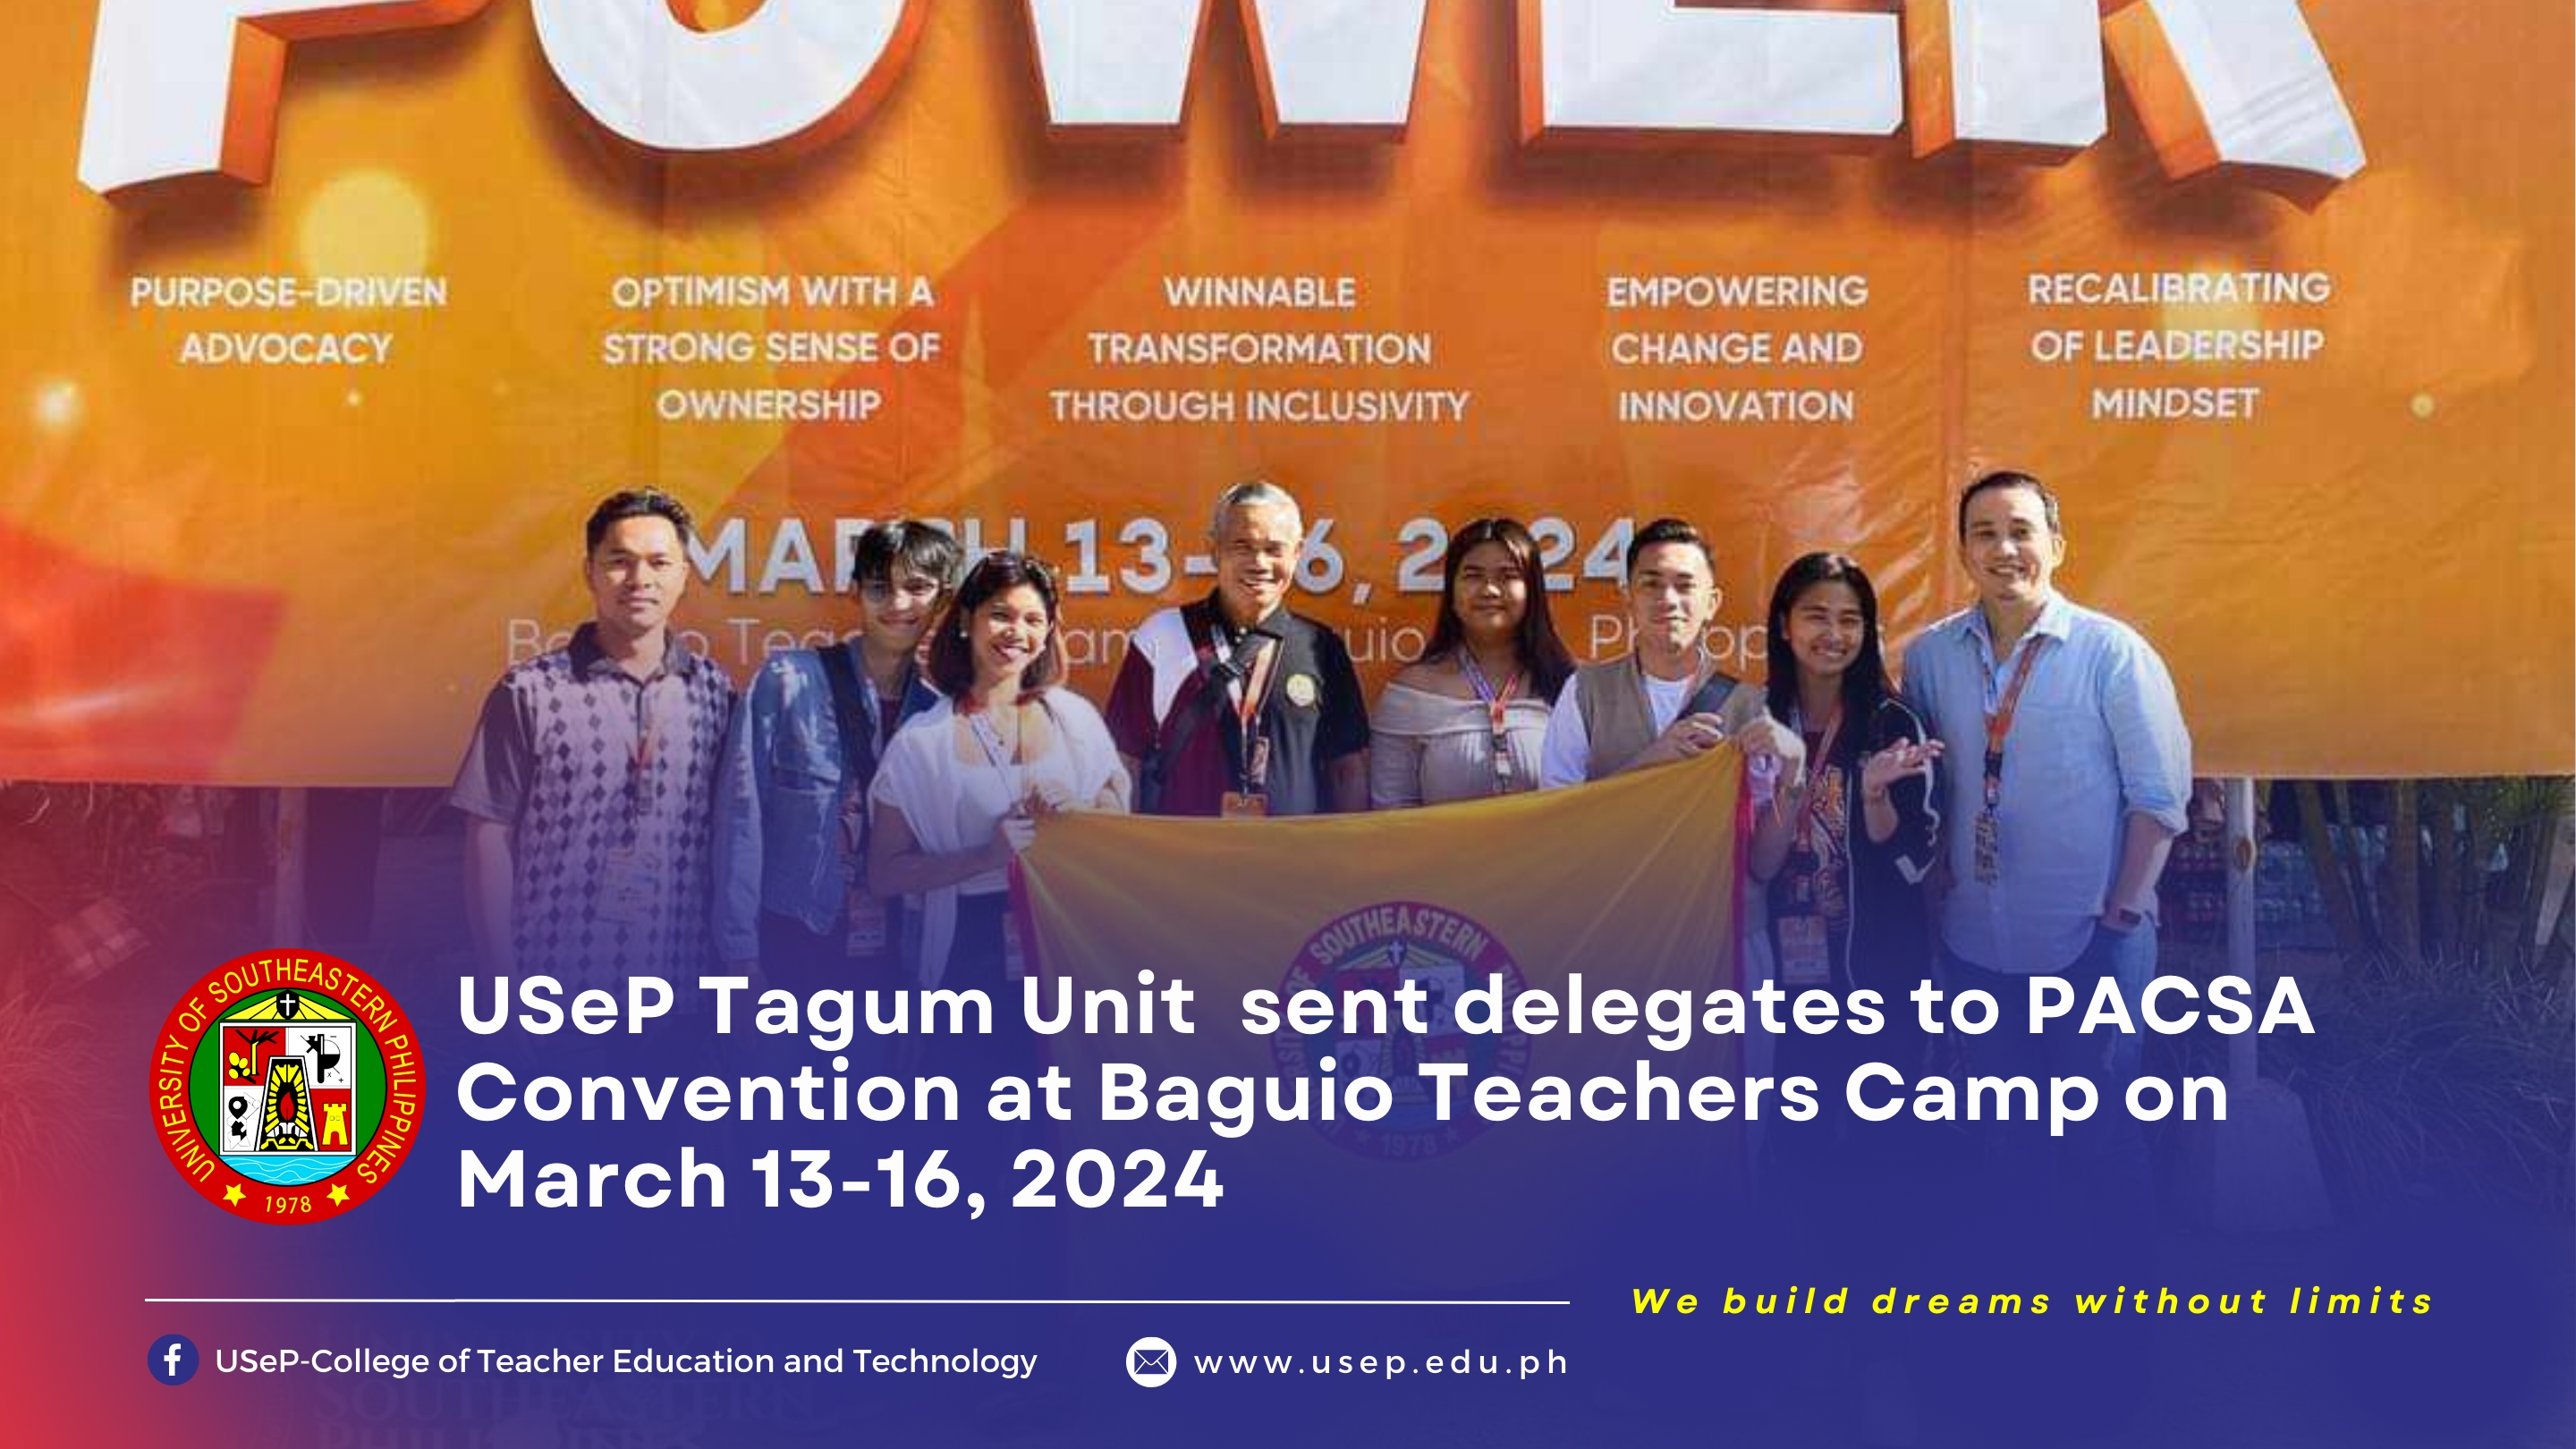 USeP Tagum Unit sent delegates to PACSA Convention at Baguio Teachers Camp on March 13-16, 2024